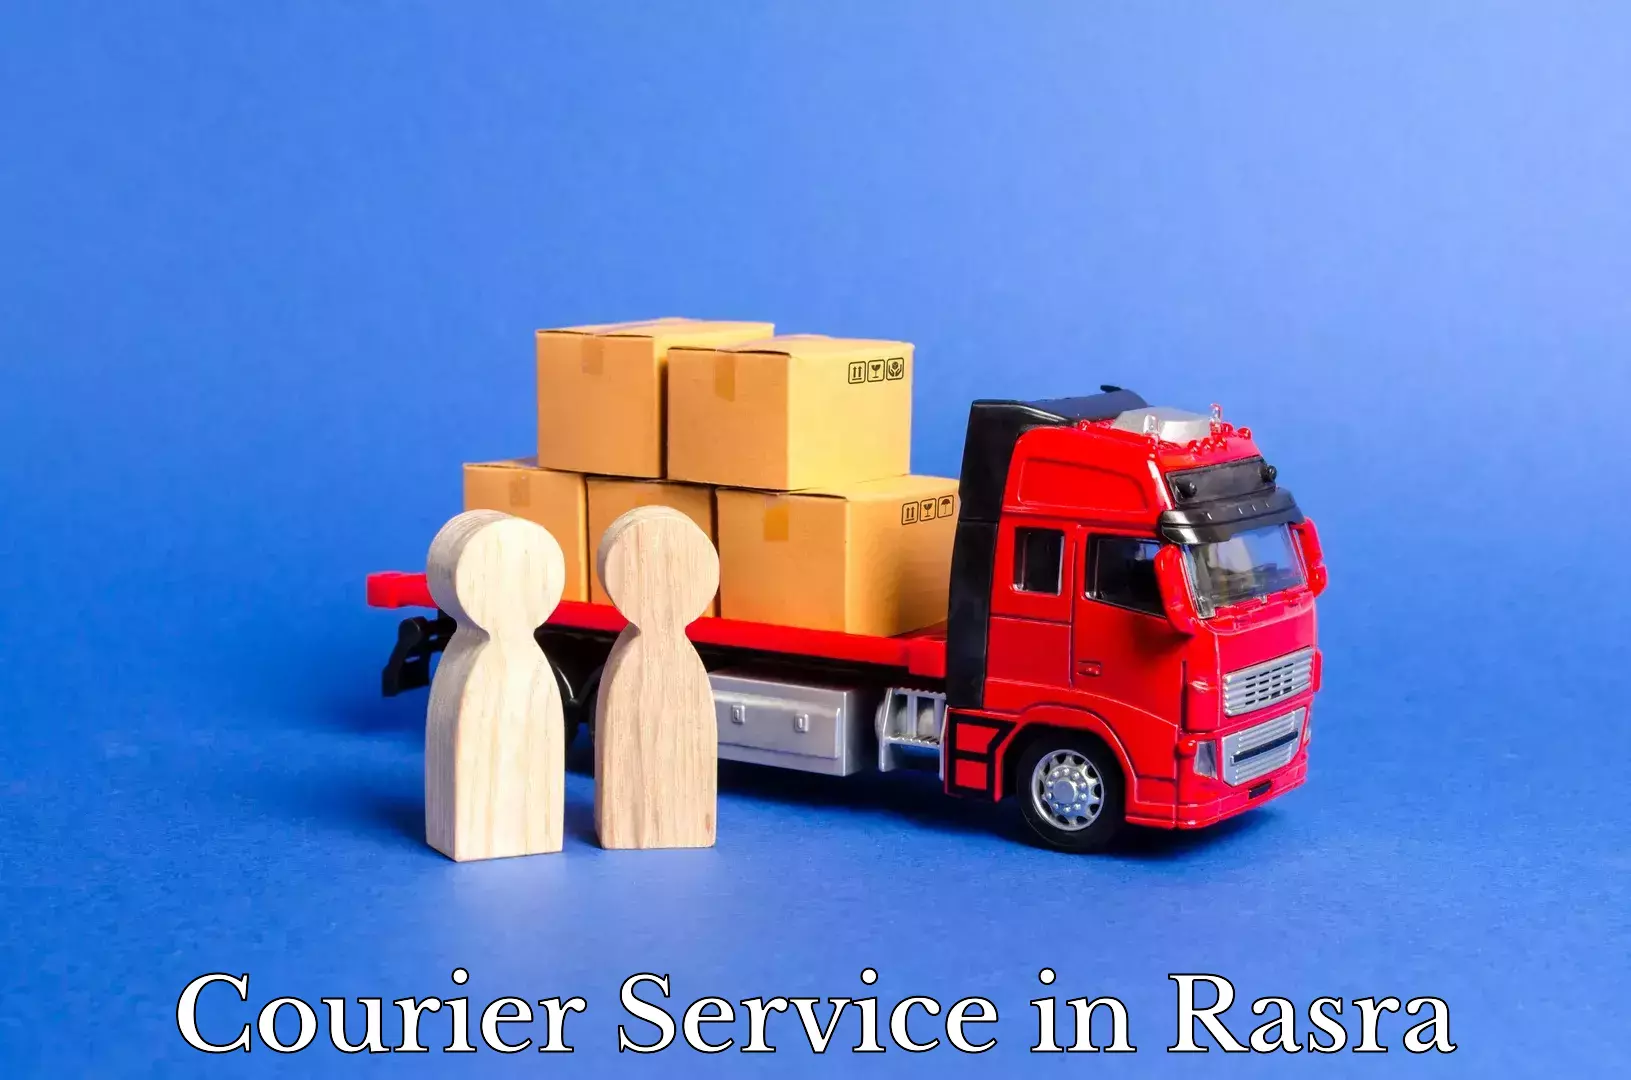 Advanced tracking systems in Rasra